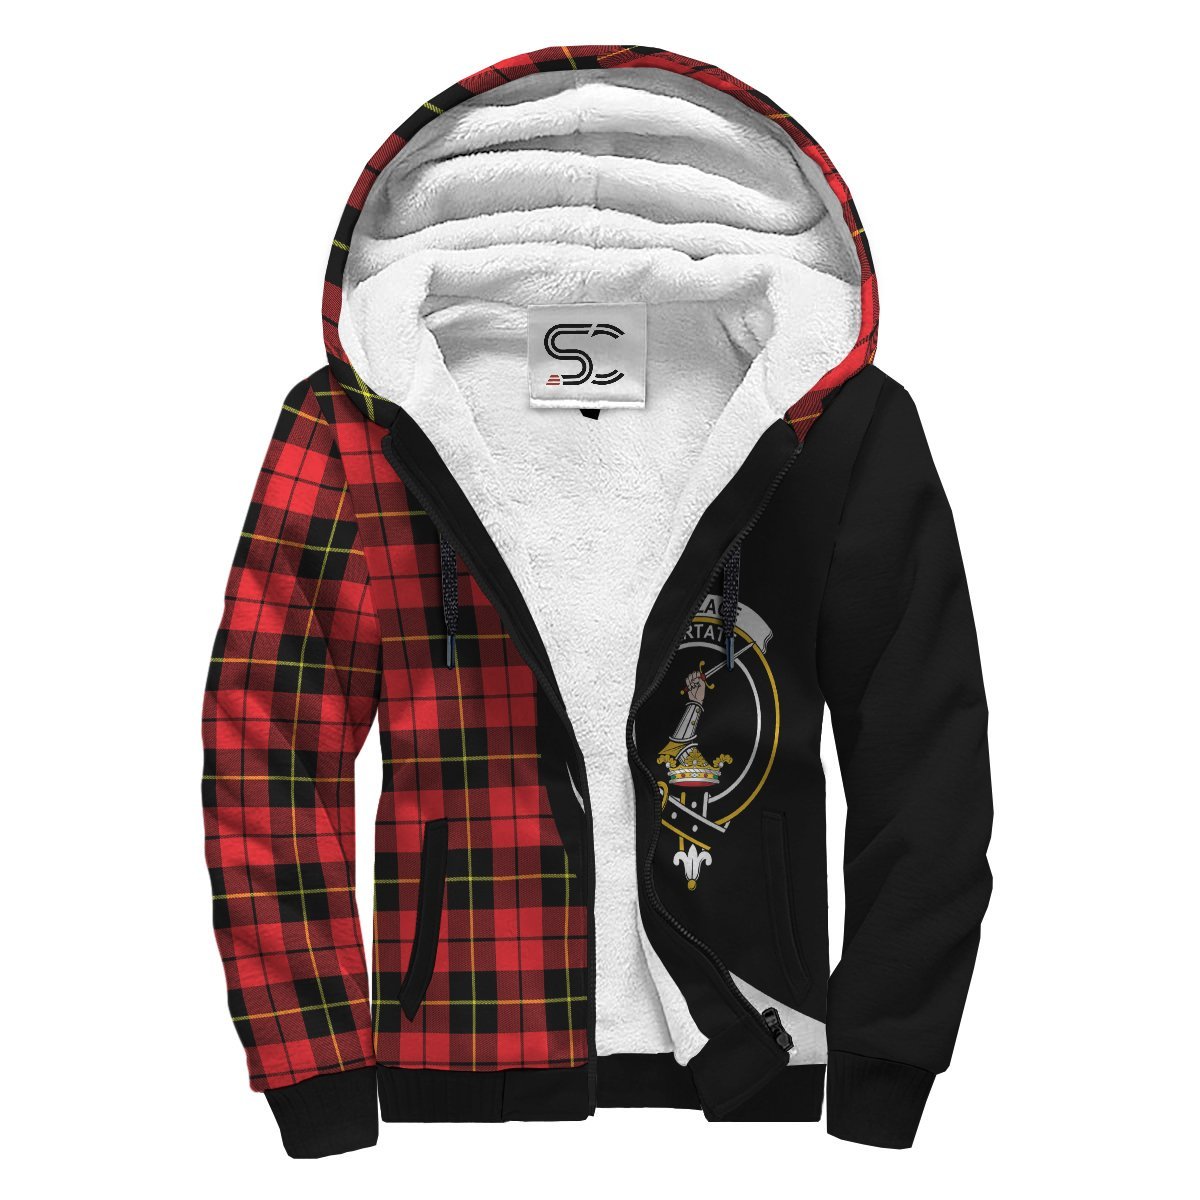 Wallace Hunting - Red Tartan Crest Sherpa Hoodie - Circle Style